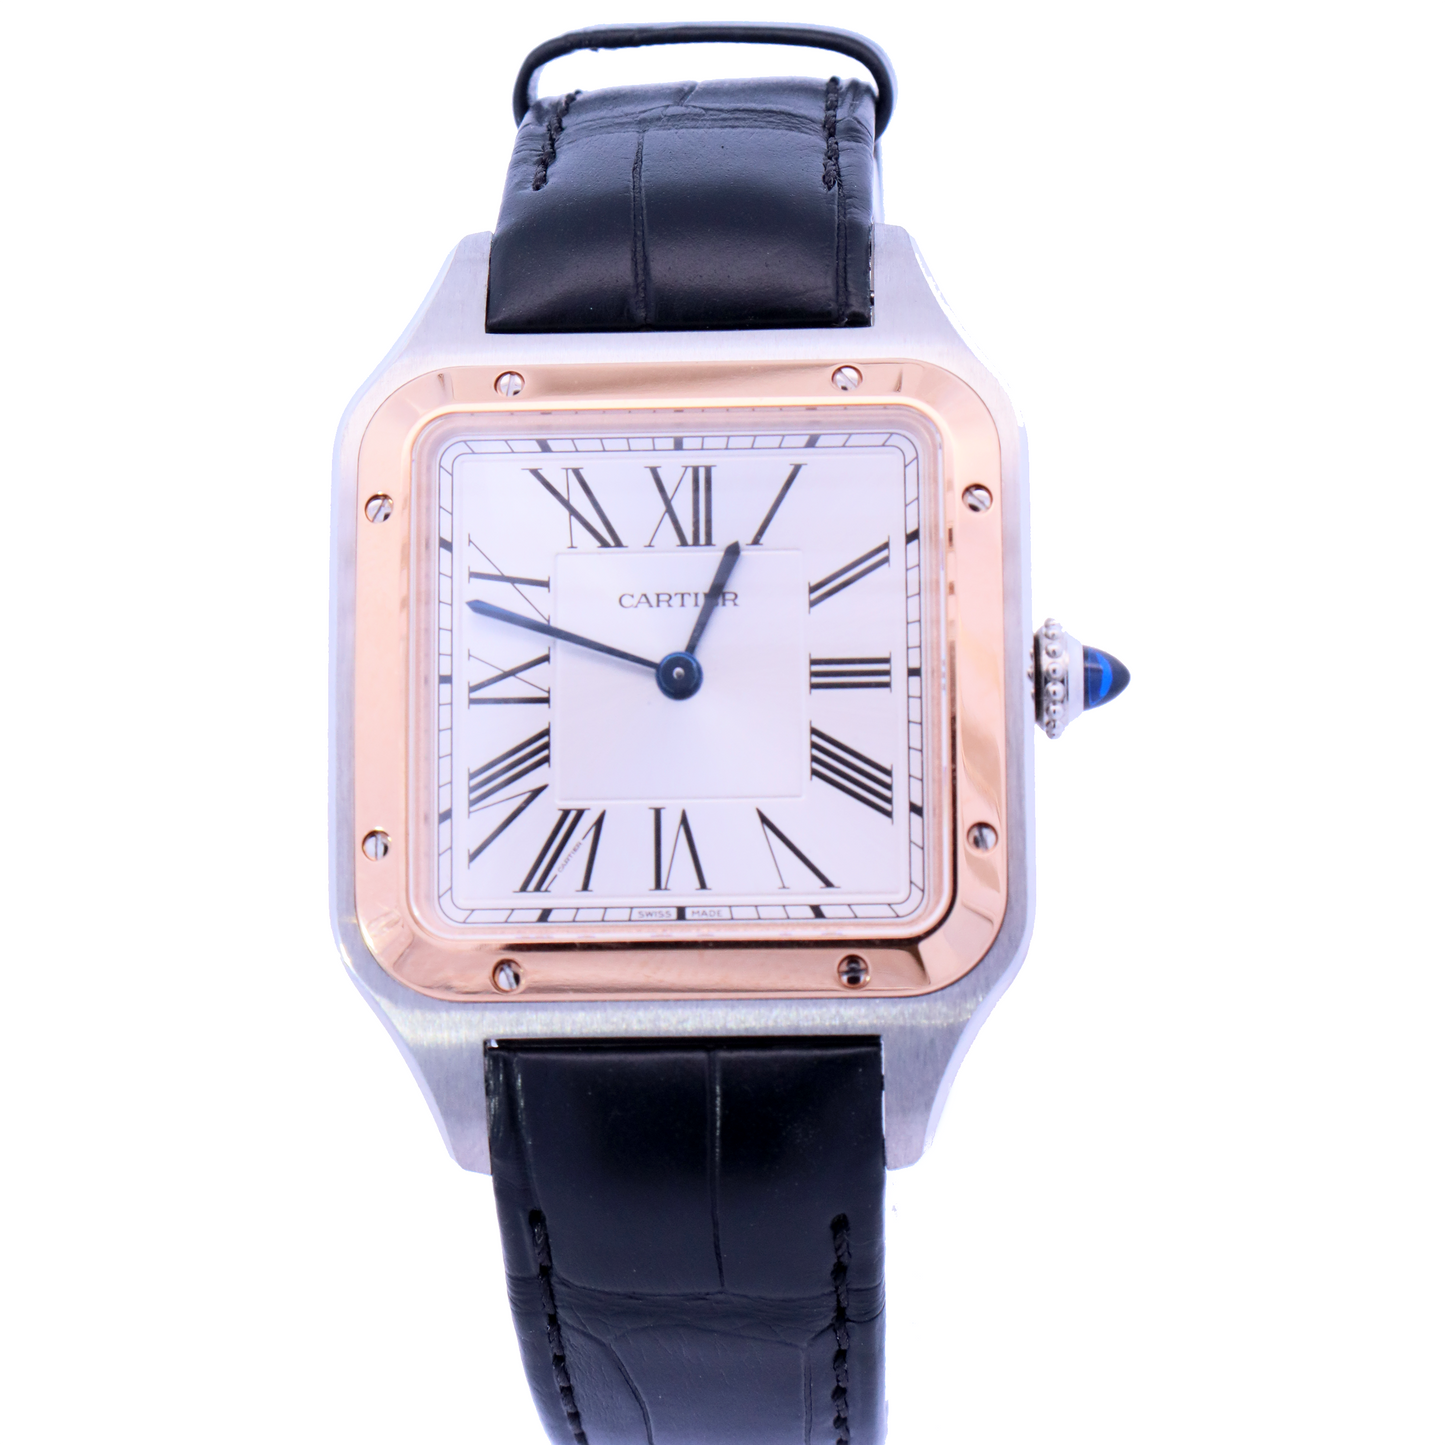 Cartier Santos Dumont Rose Gold and Stainless Steel 31mm White Roman Dial Watch | Ref# W2SA0011 - Happy Jewelers Fine Jewelry Lifetime Warranty